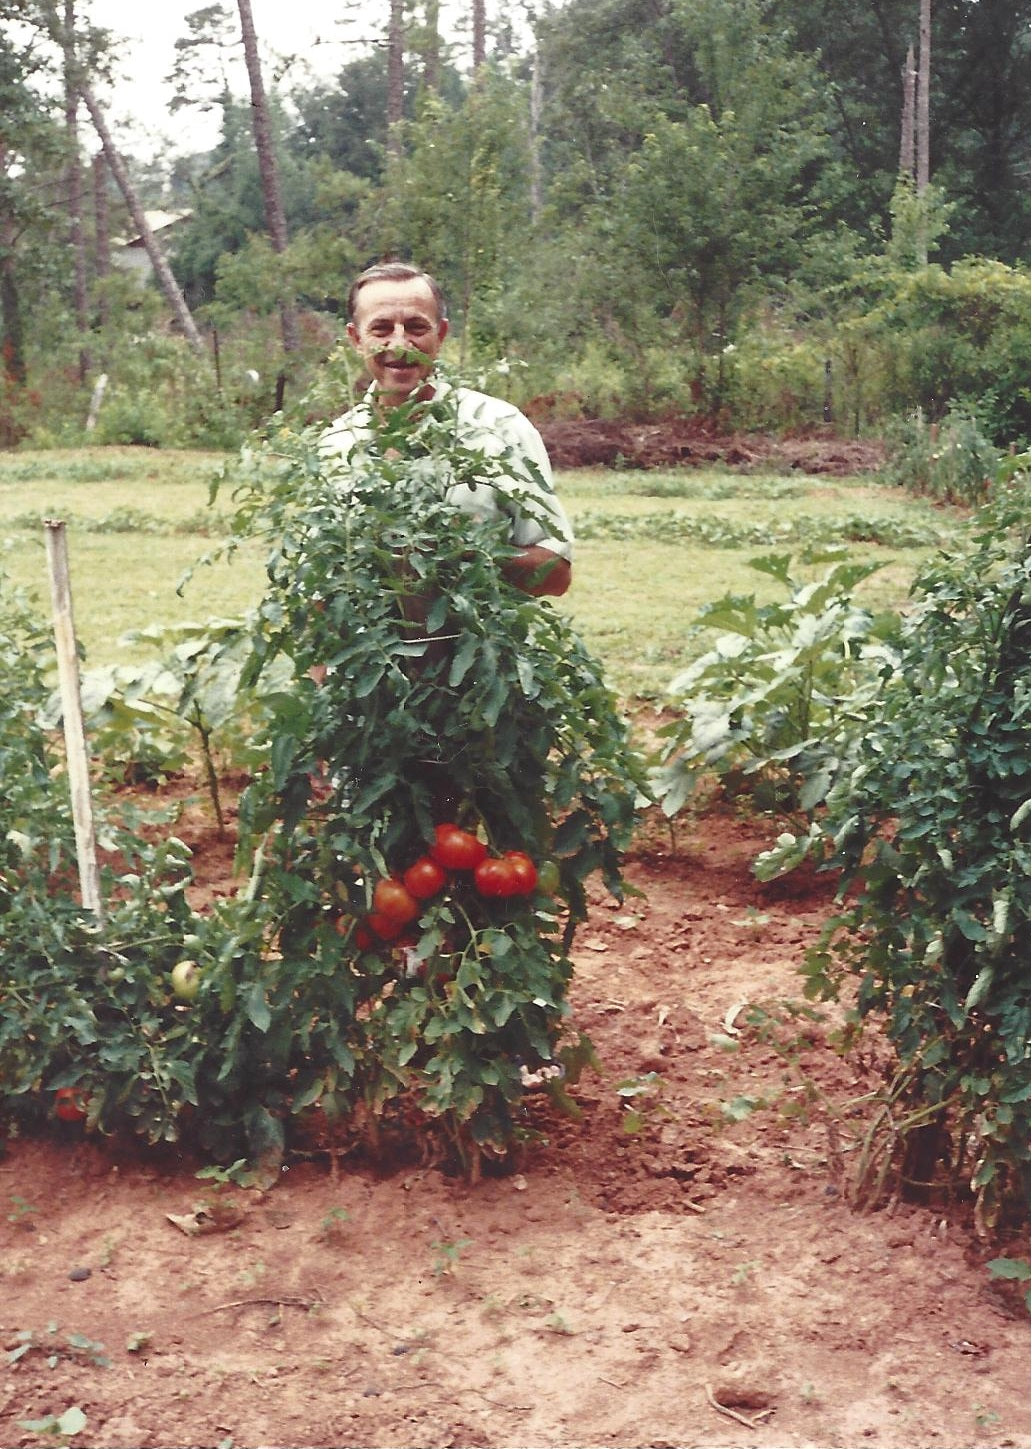 The Story of Gro-Rite Garden - Poppy with more tomatoes